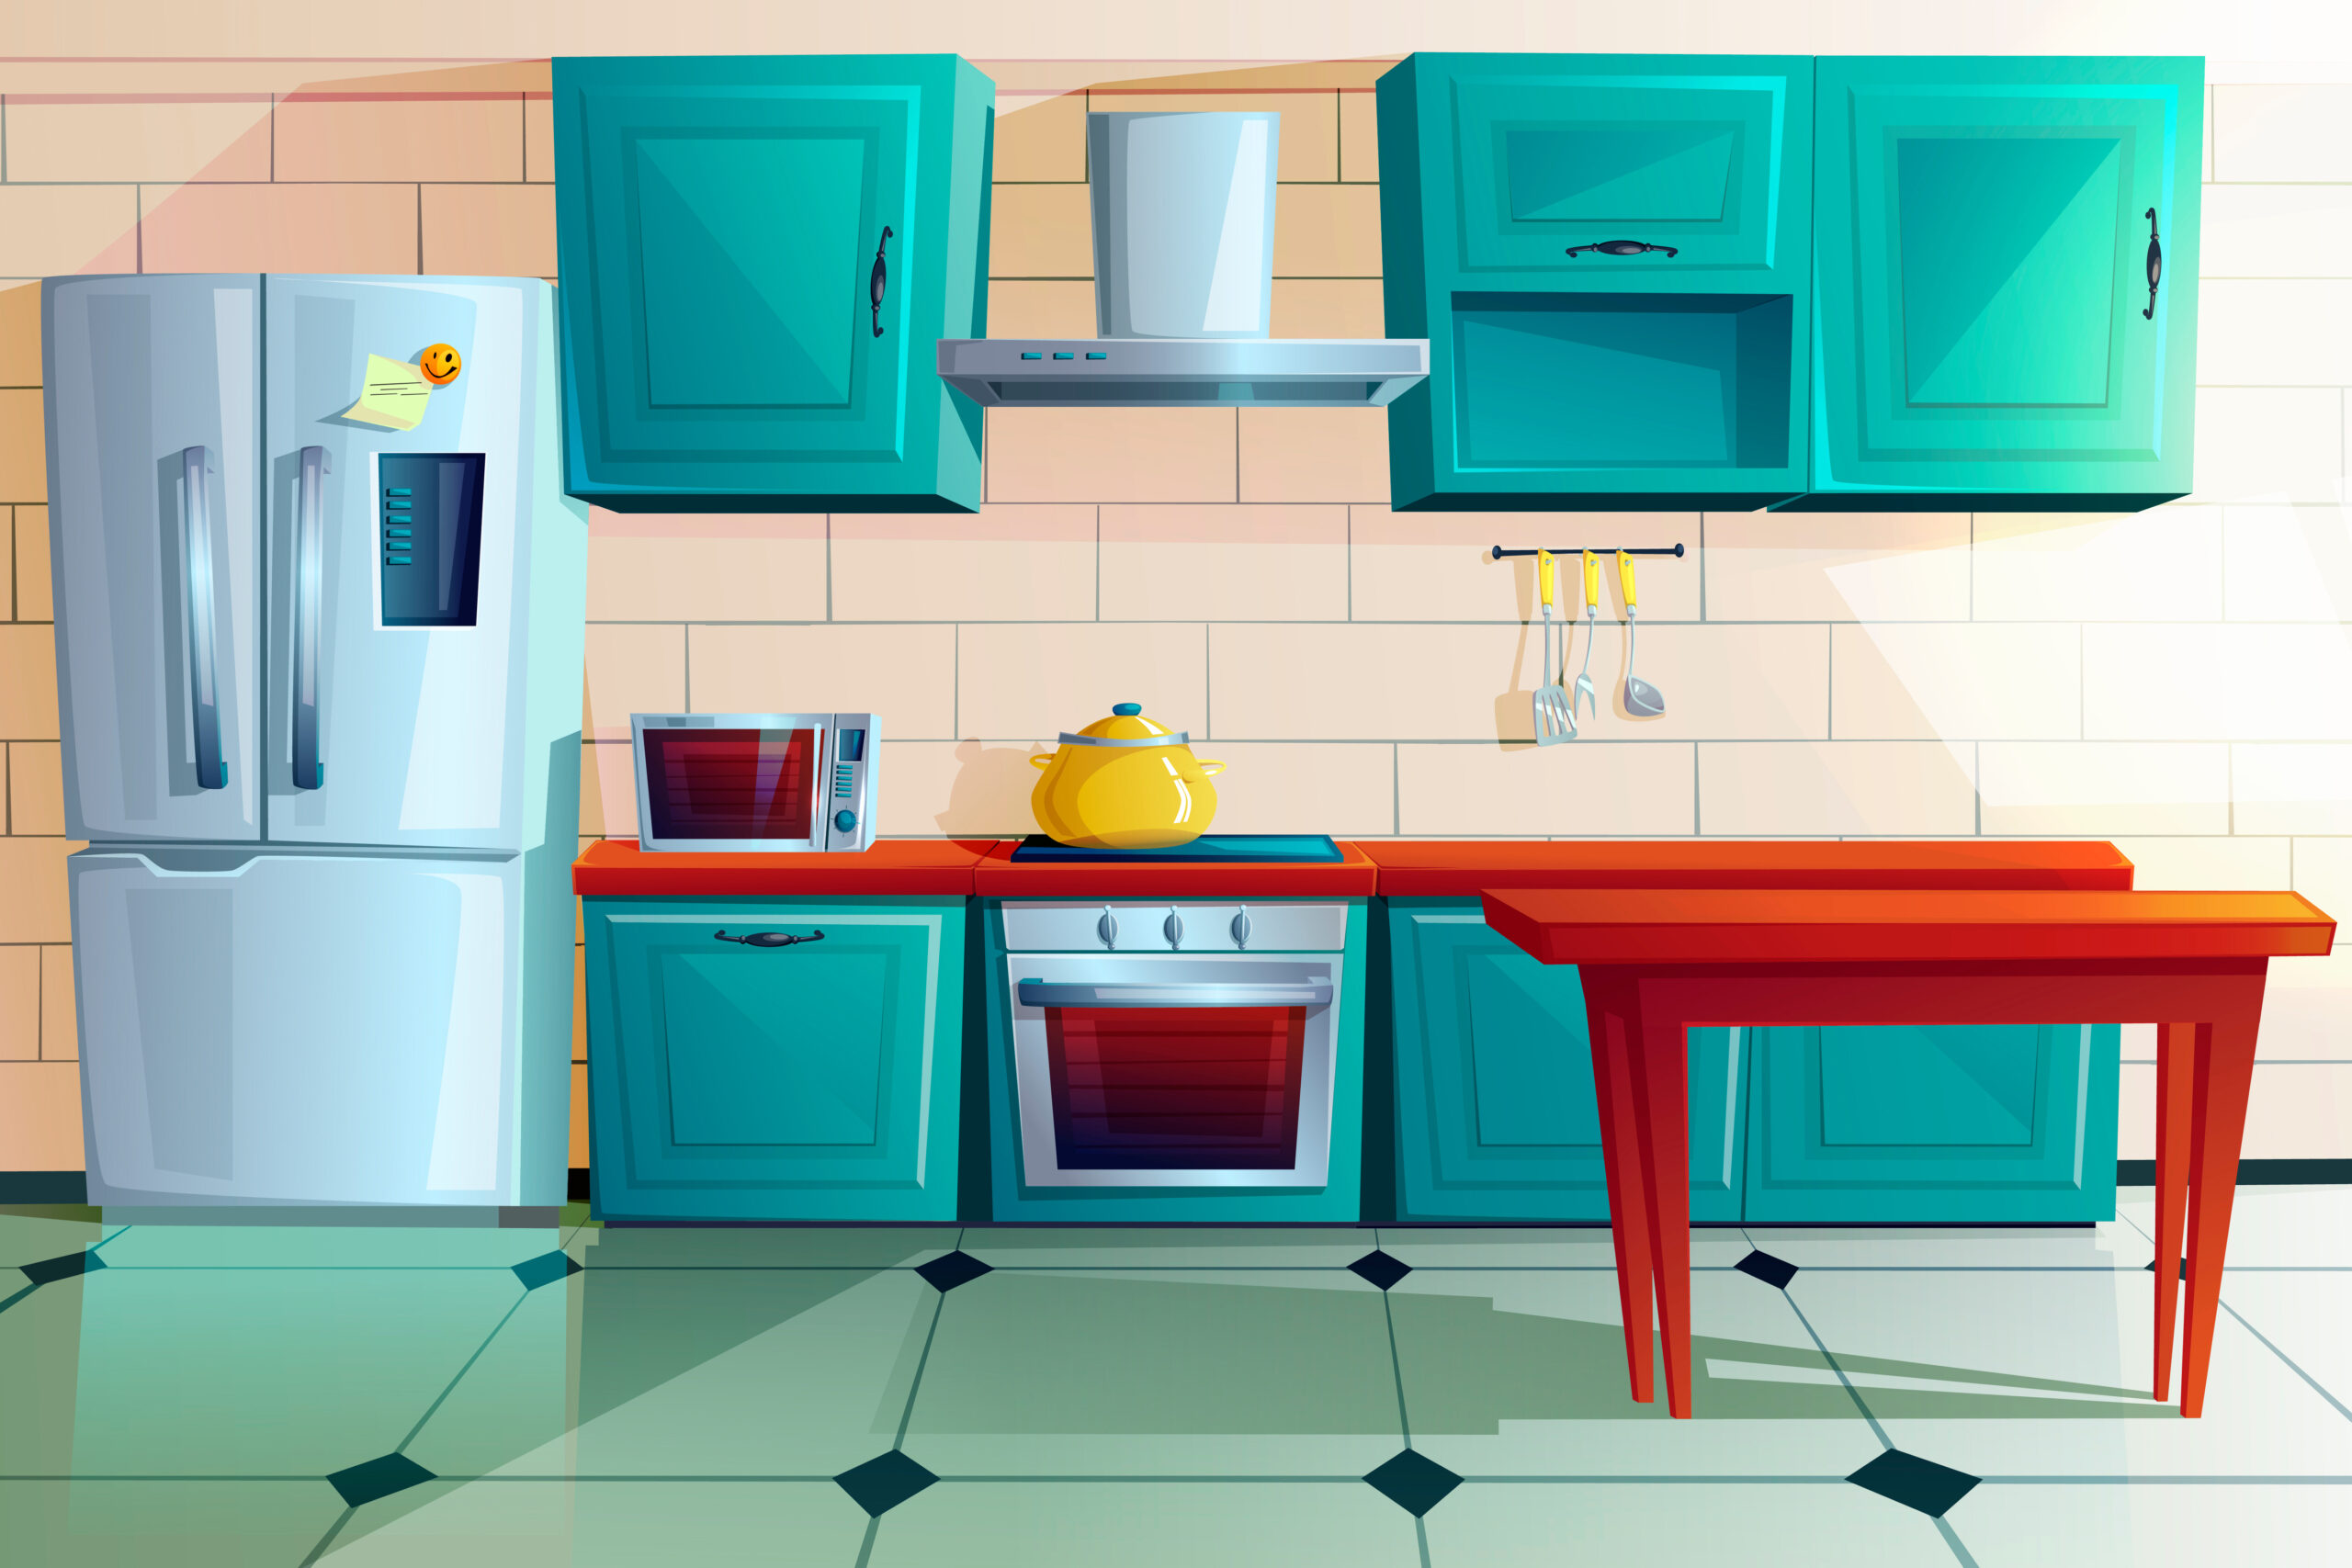 Kitchen interior witn furniture cartoon vector illustration. Home cooking room with wooden dining table, blue kitchen cabinets, fridge with magnet and reminder, oven, microwave, hob and extractor hood